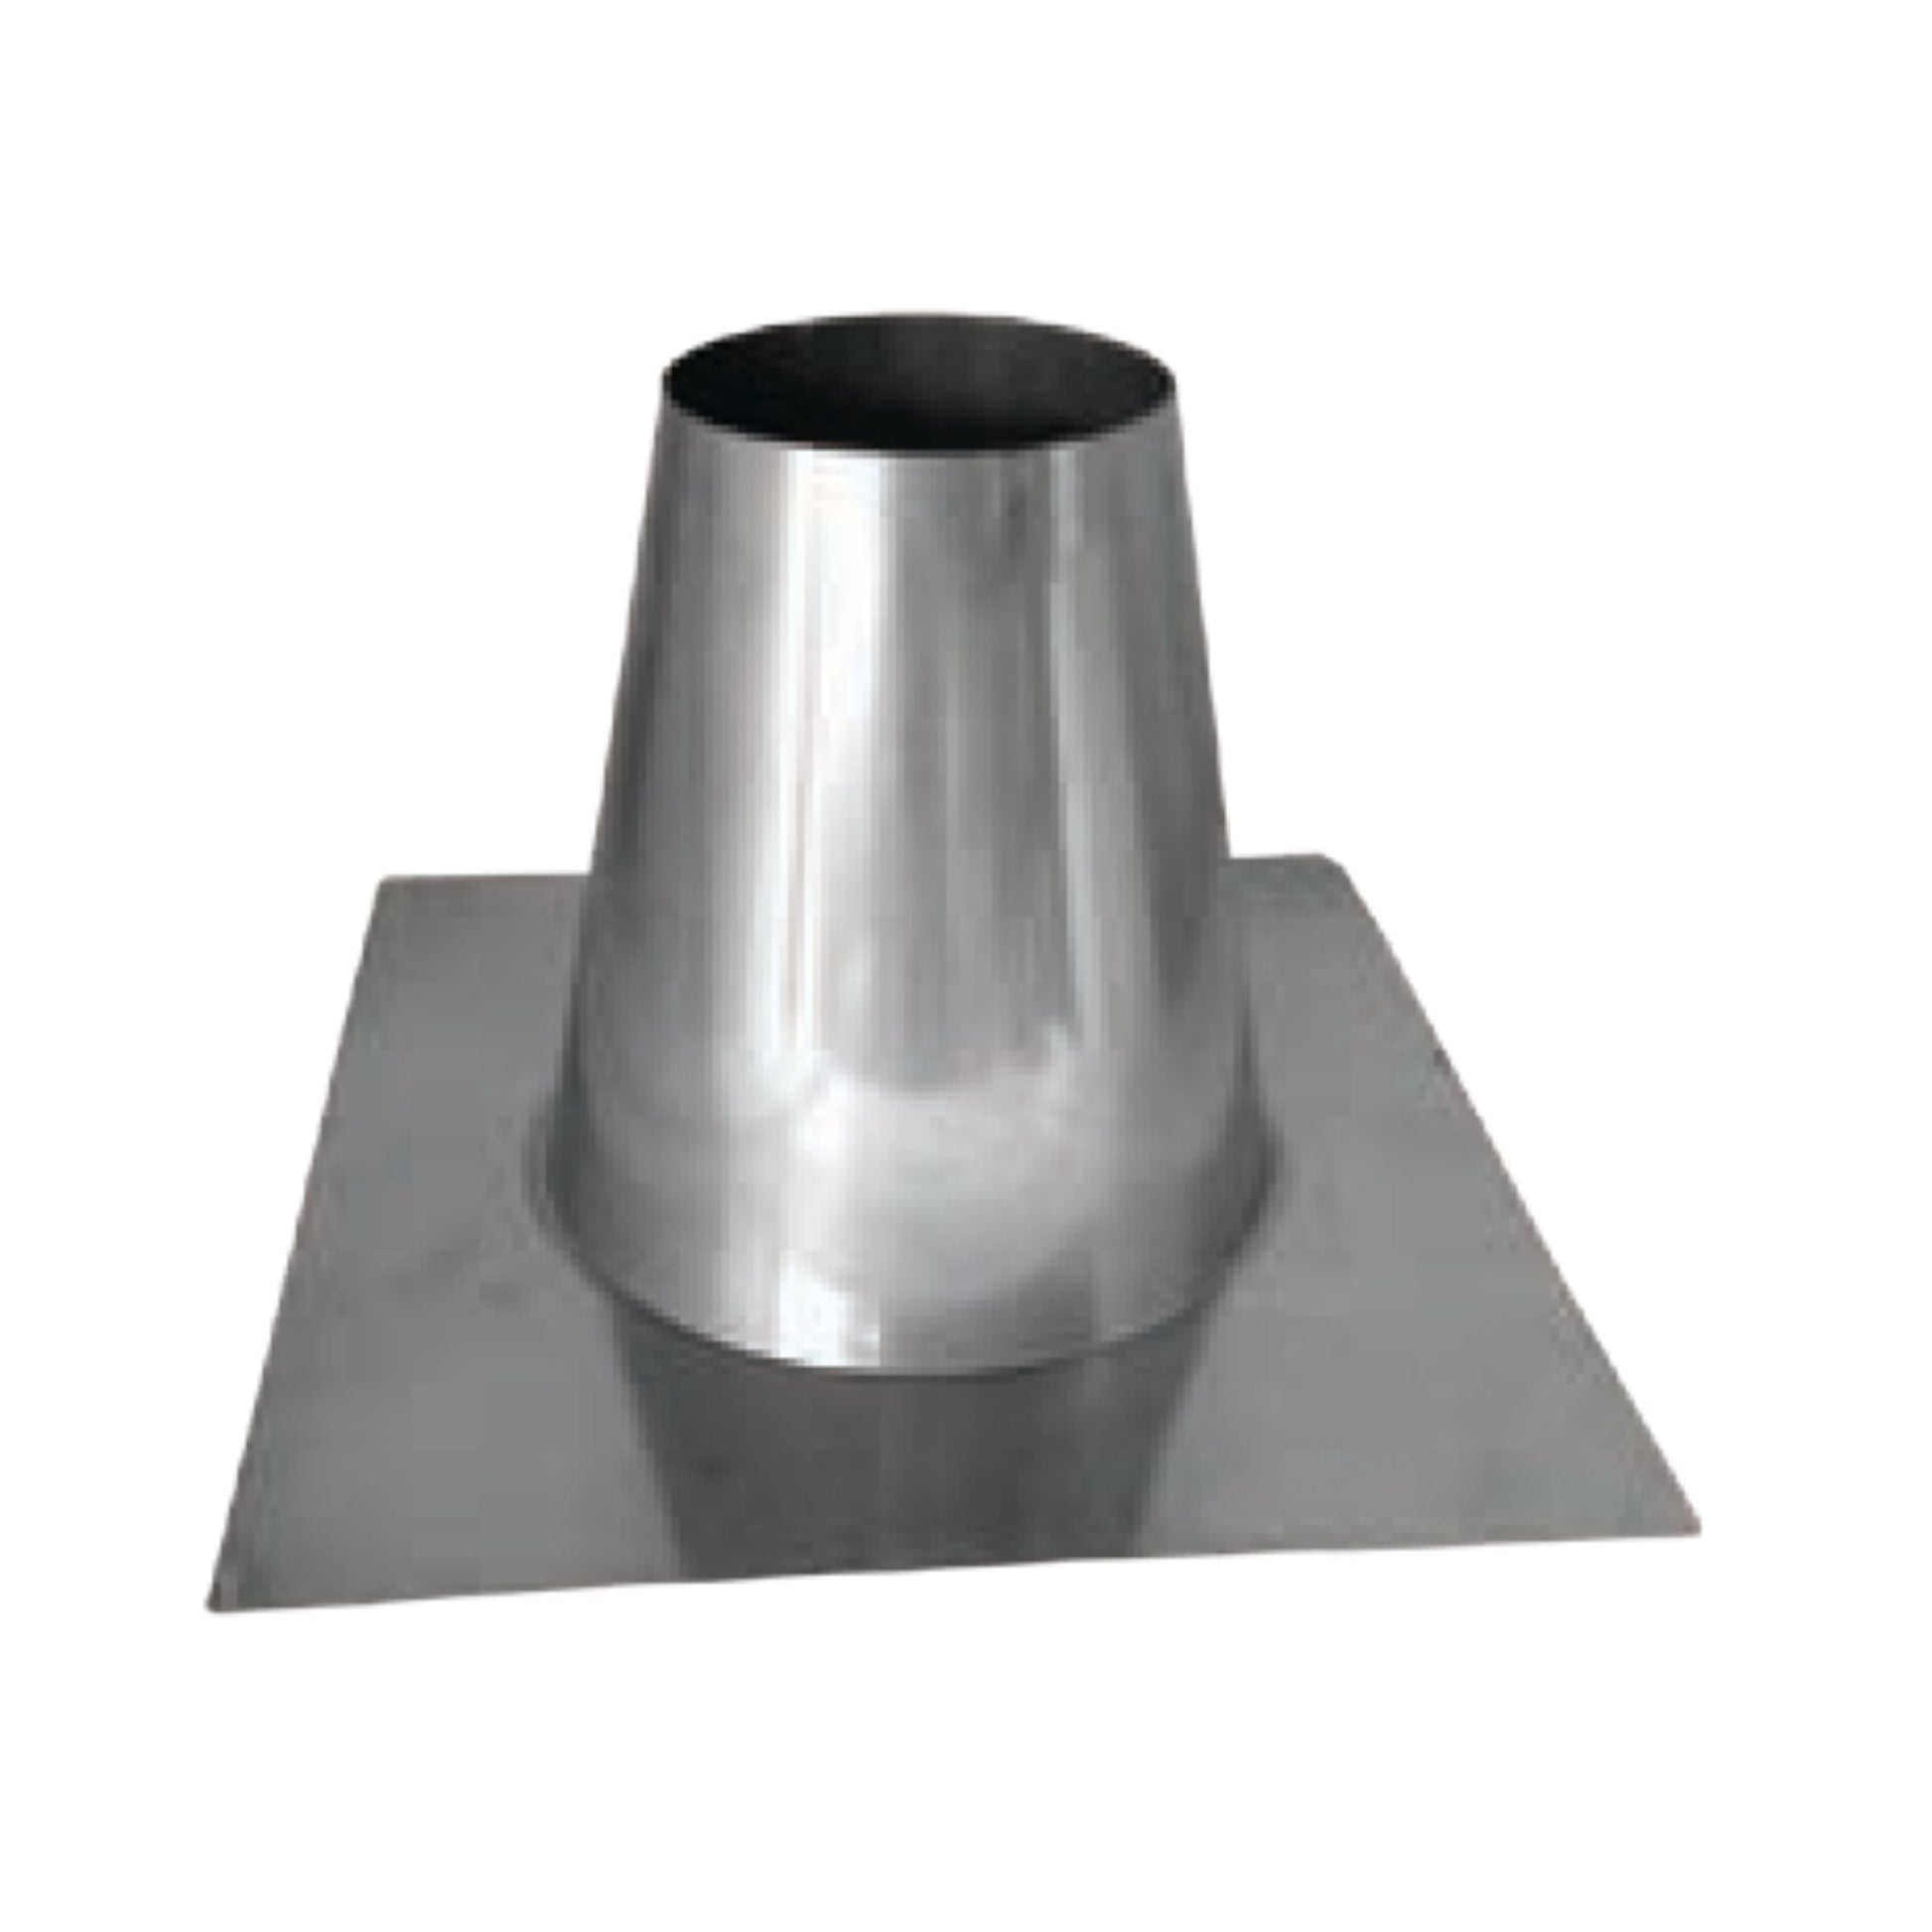 DuraVent FasNSeal 5" 29-4C Stainless Steel Tall Cone Flashing